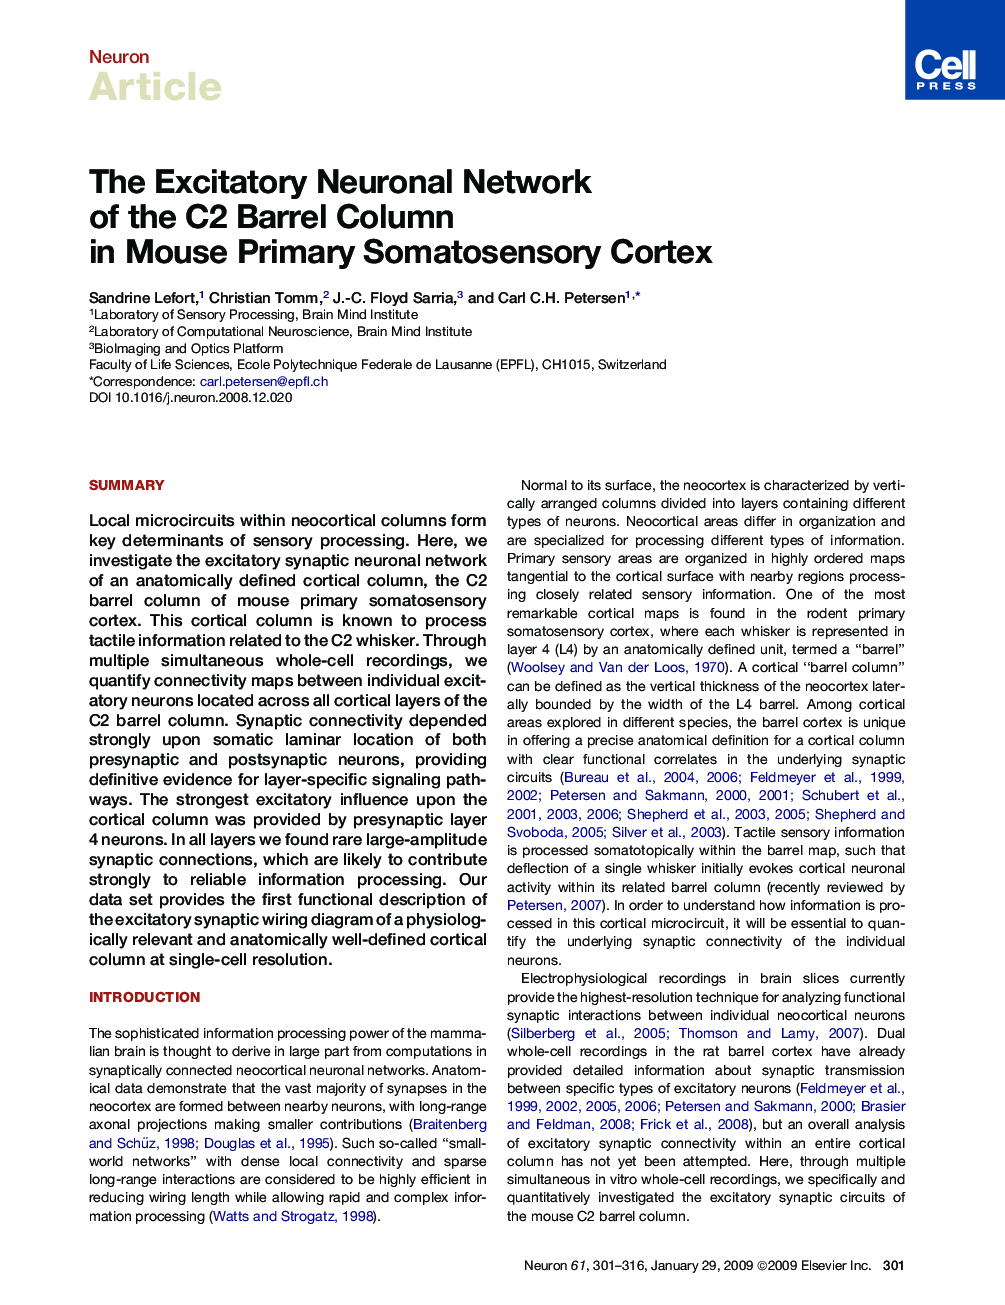 The Excitatory Neuronal Network of the C2 Barrel Column in Mouse Primary Somatosensory Cortex